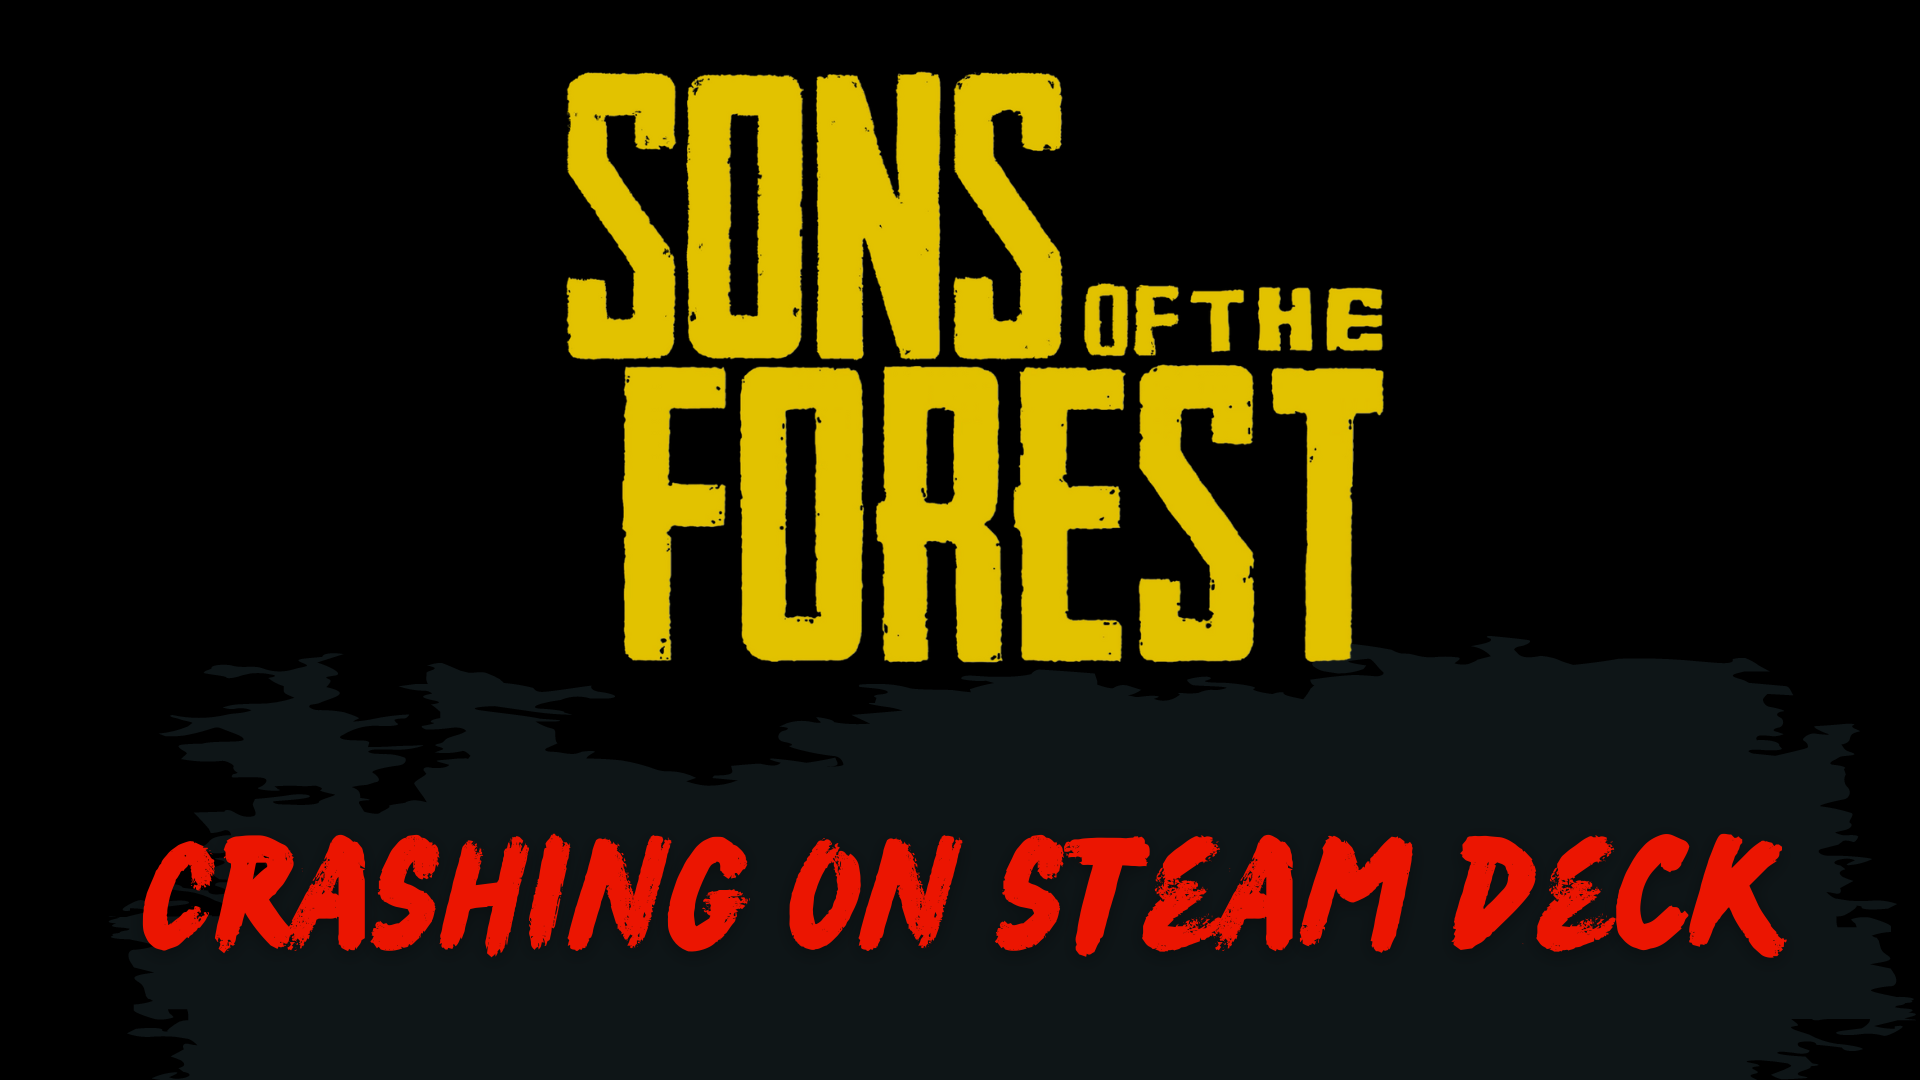 Is Sons of the Forest Steam Deck compatible?